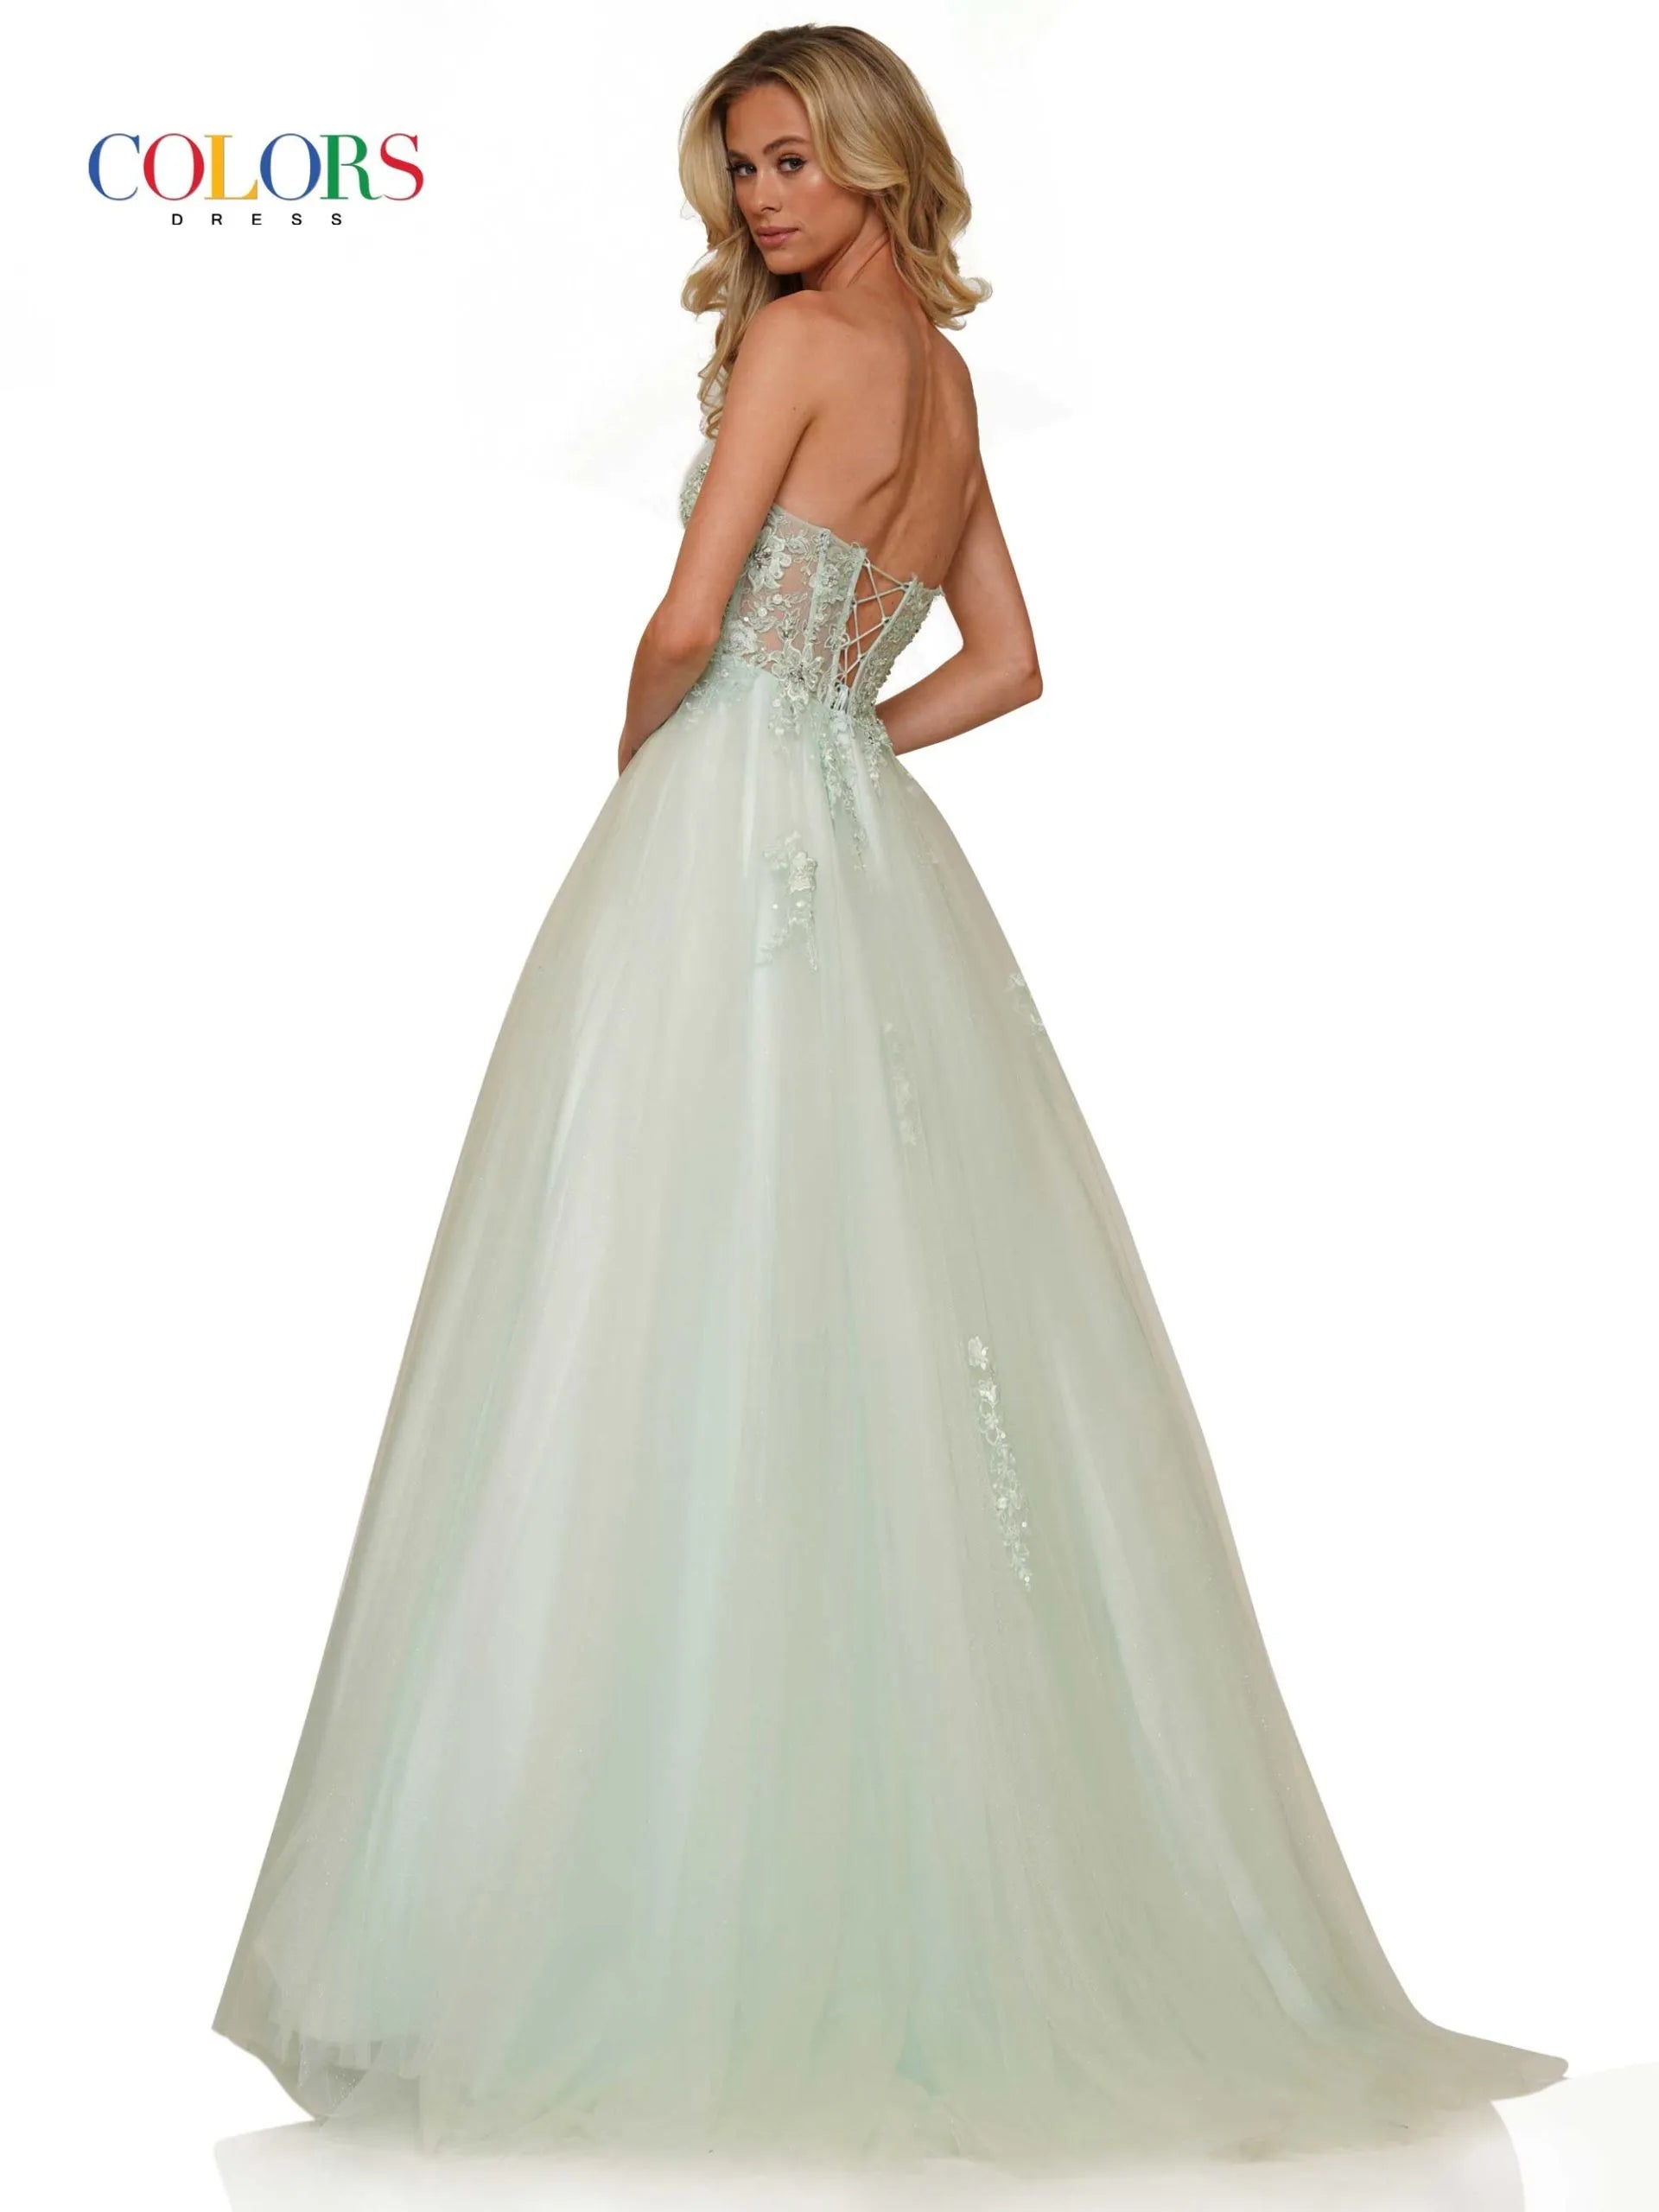 Elevate your formal look with the Colors Dress 2898 Long Prom Dress. This A-line gown features a corset bodice for a flattering fit, while the tulle and lace applique add a touch of elegance. Perfect for prom or pageants, this dress will make you stand out in style.